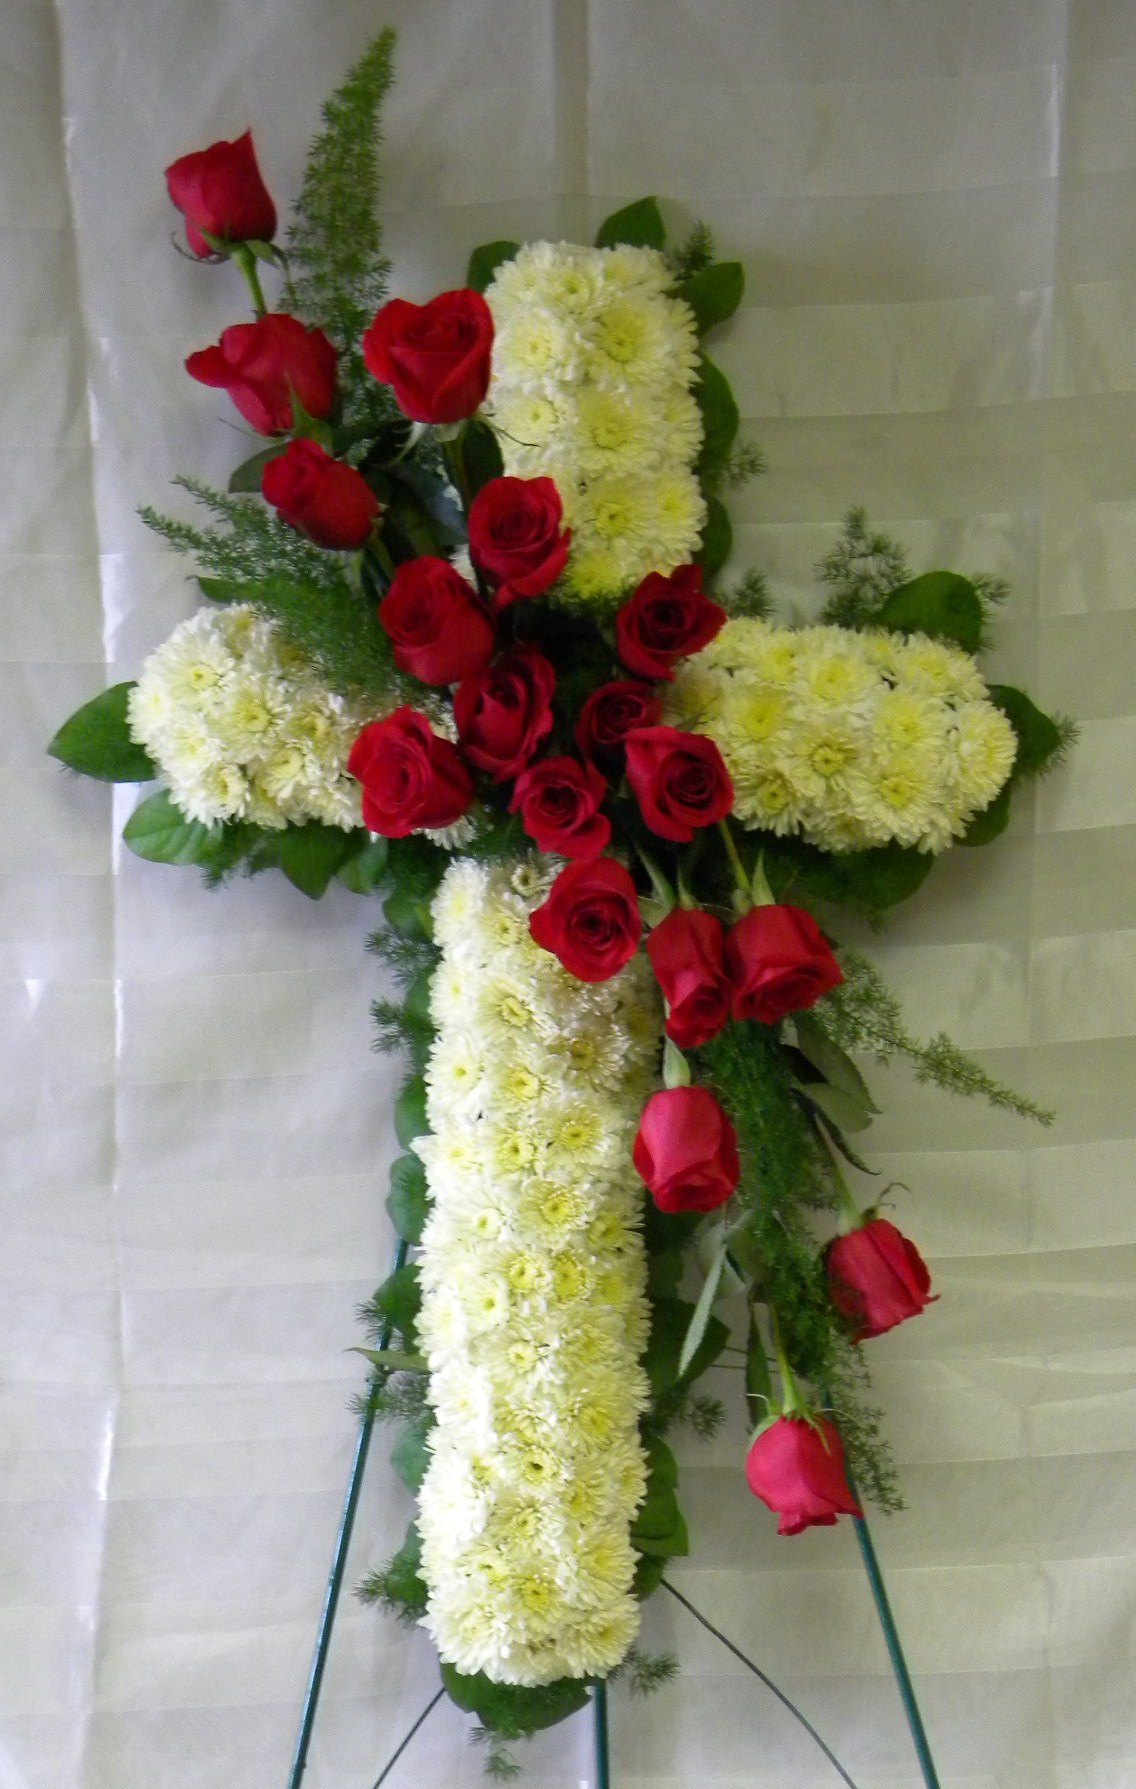 Sympathy flowers sympathy cross with white flower covering the cross and red roses down the center